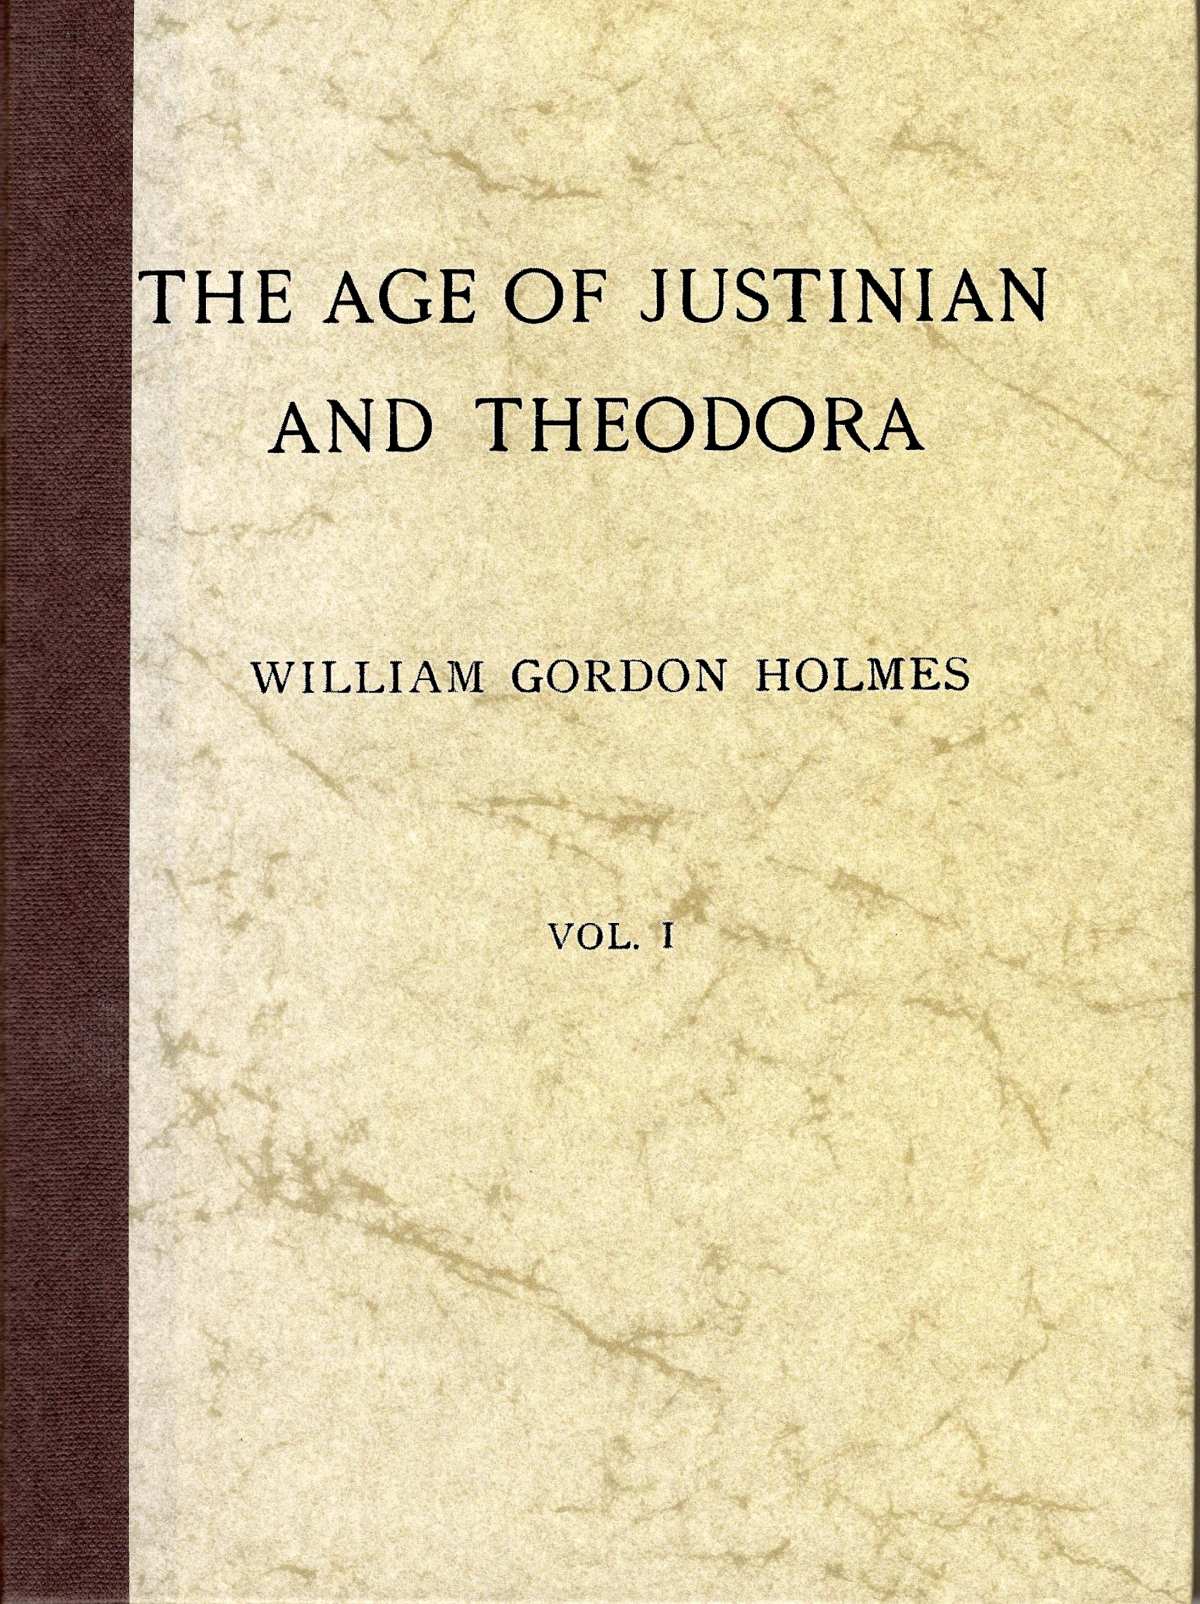 The Age of Justinian and Theodora: A History of the Sixth Century A.D., Volume 1 (of 2)